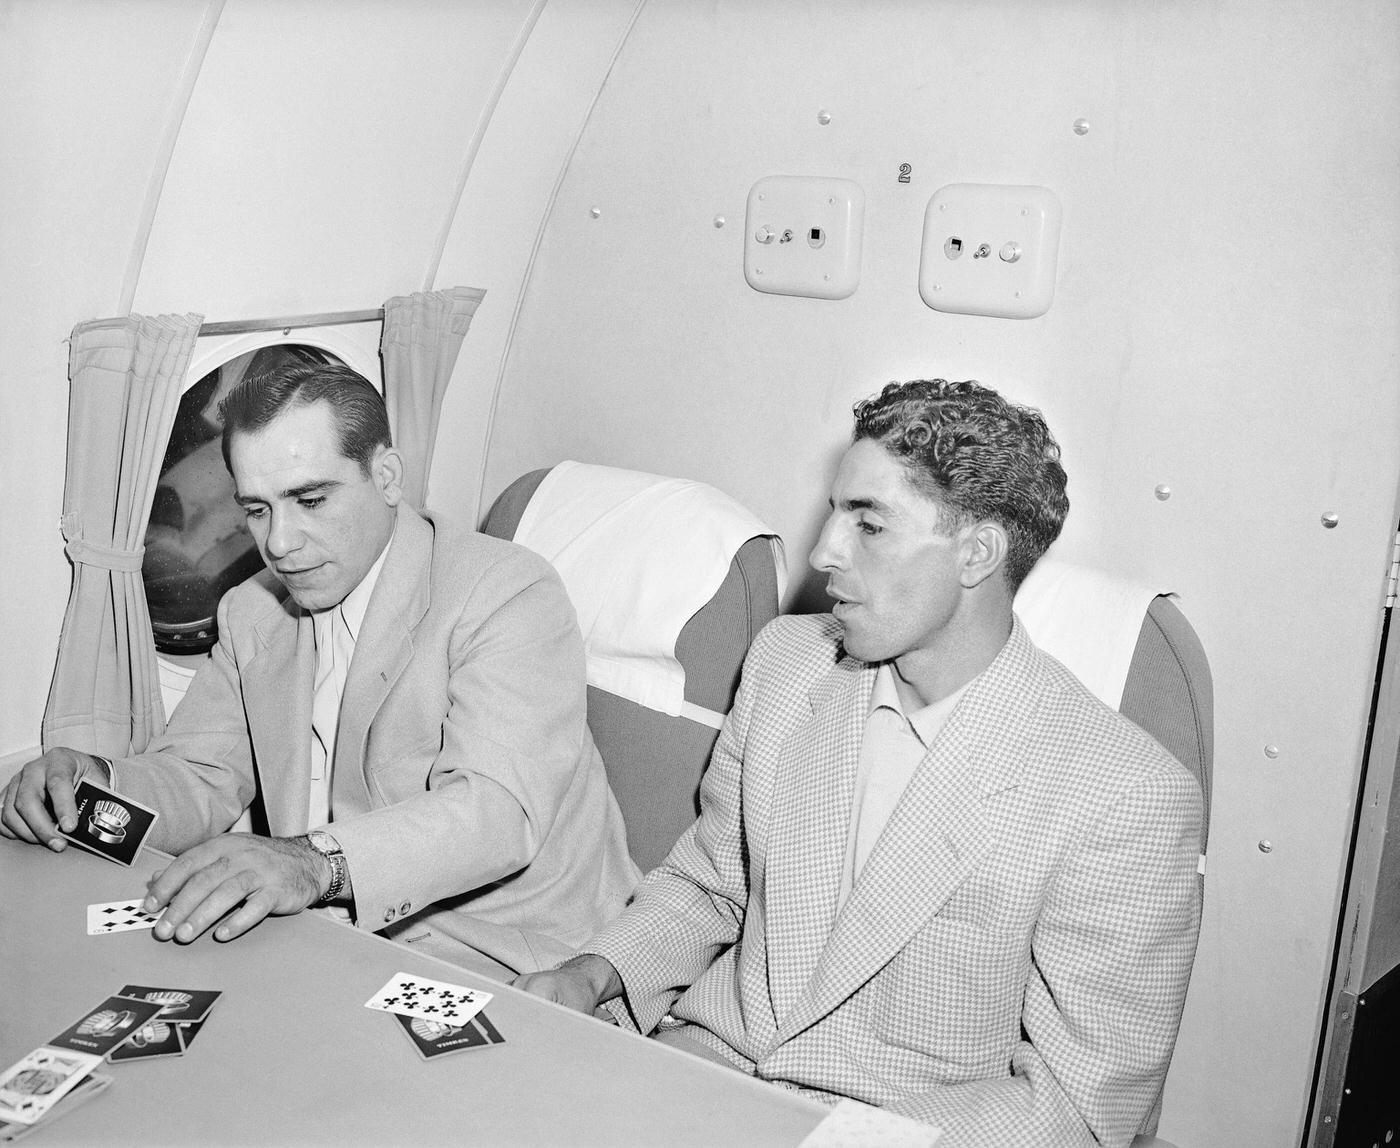 Yankee catcher Yogi Berra and Phil Rizzuto play cribbage while waiting for chartered TWA flights to take off amidst a railroad strike.